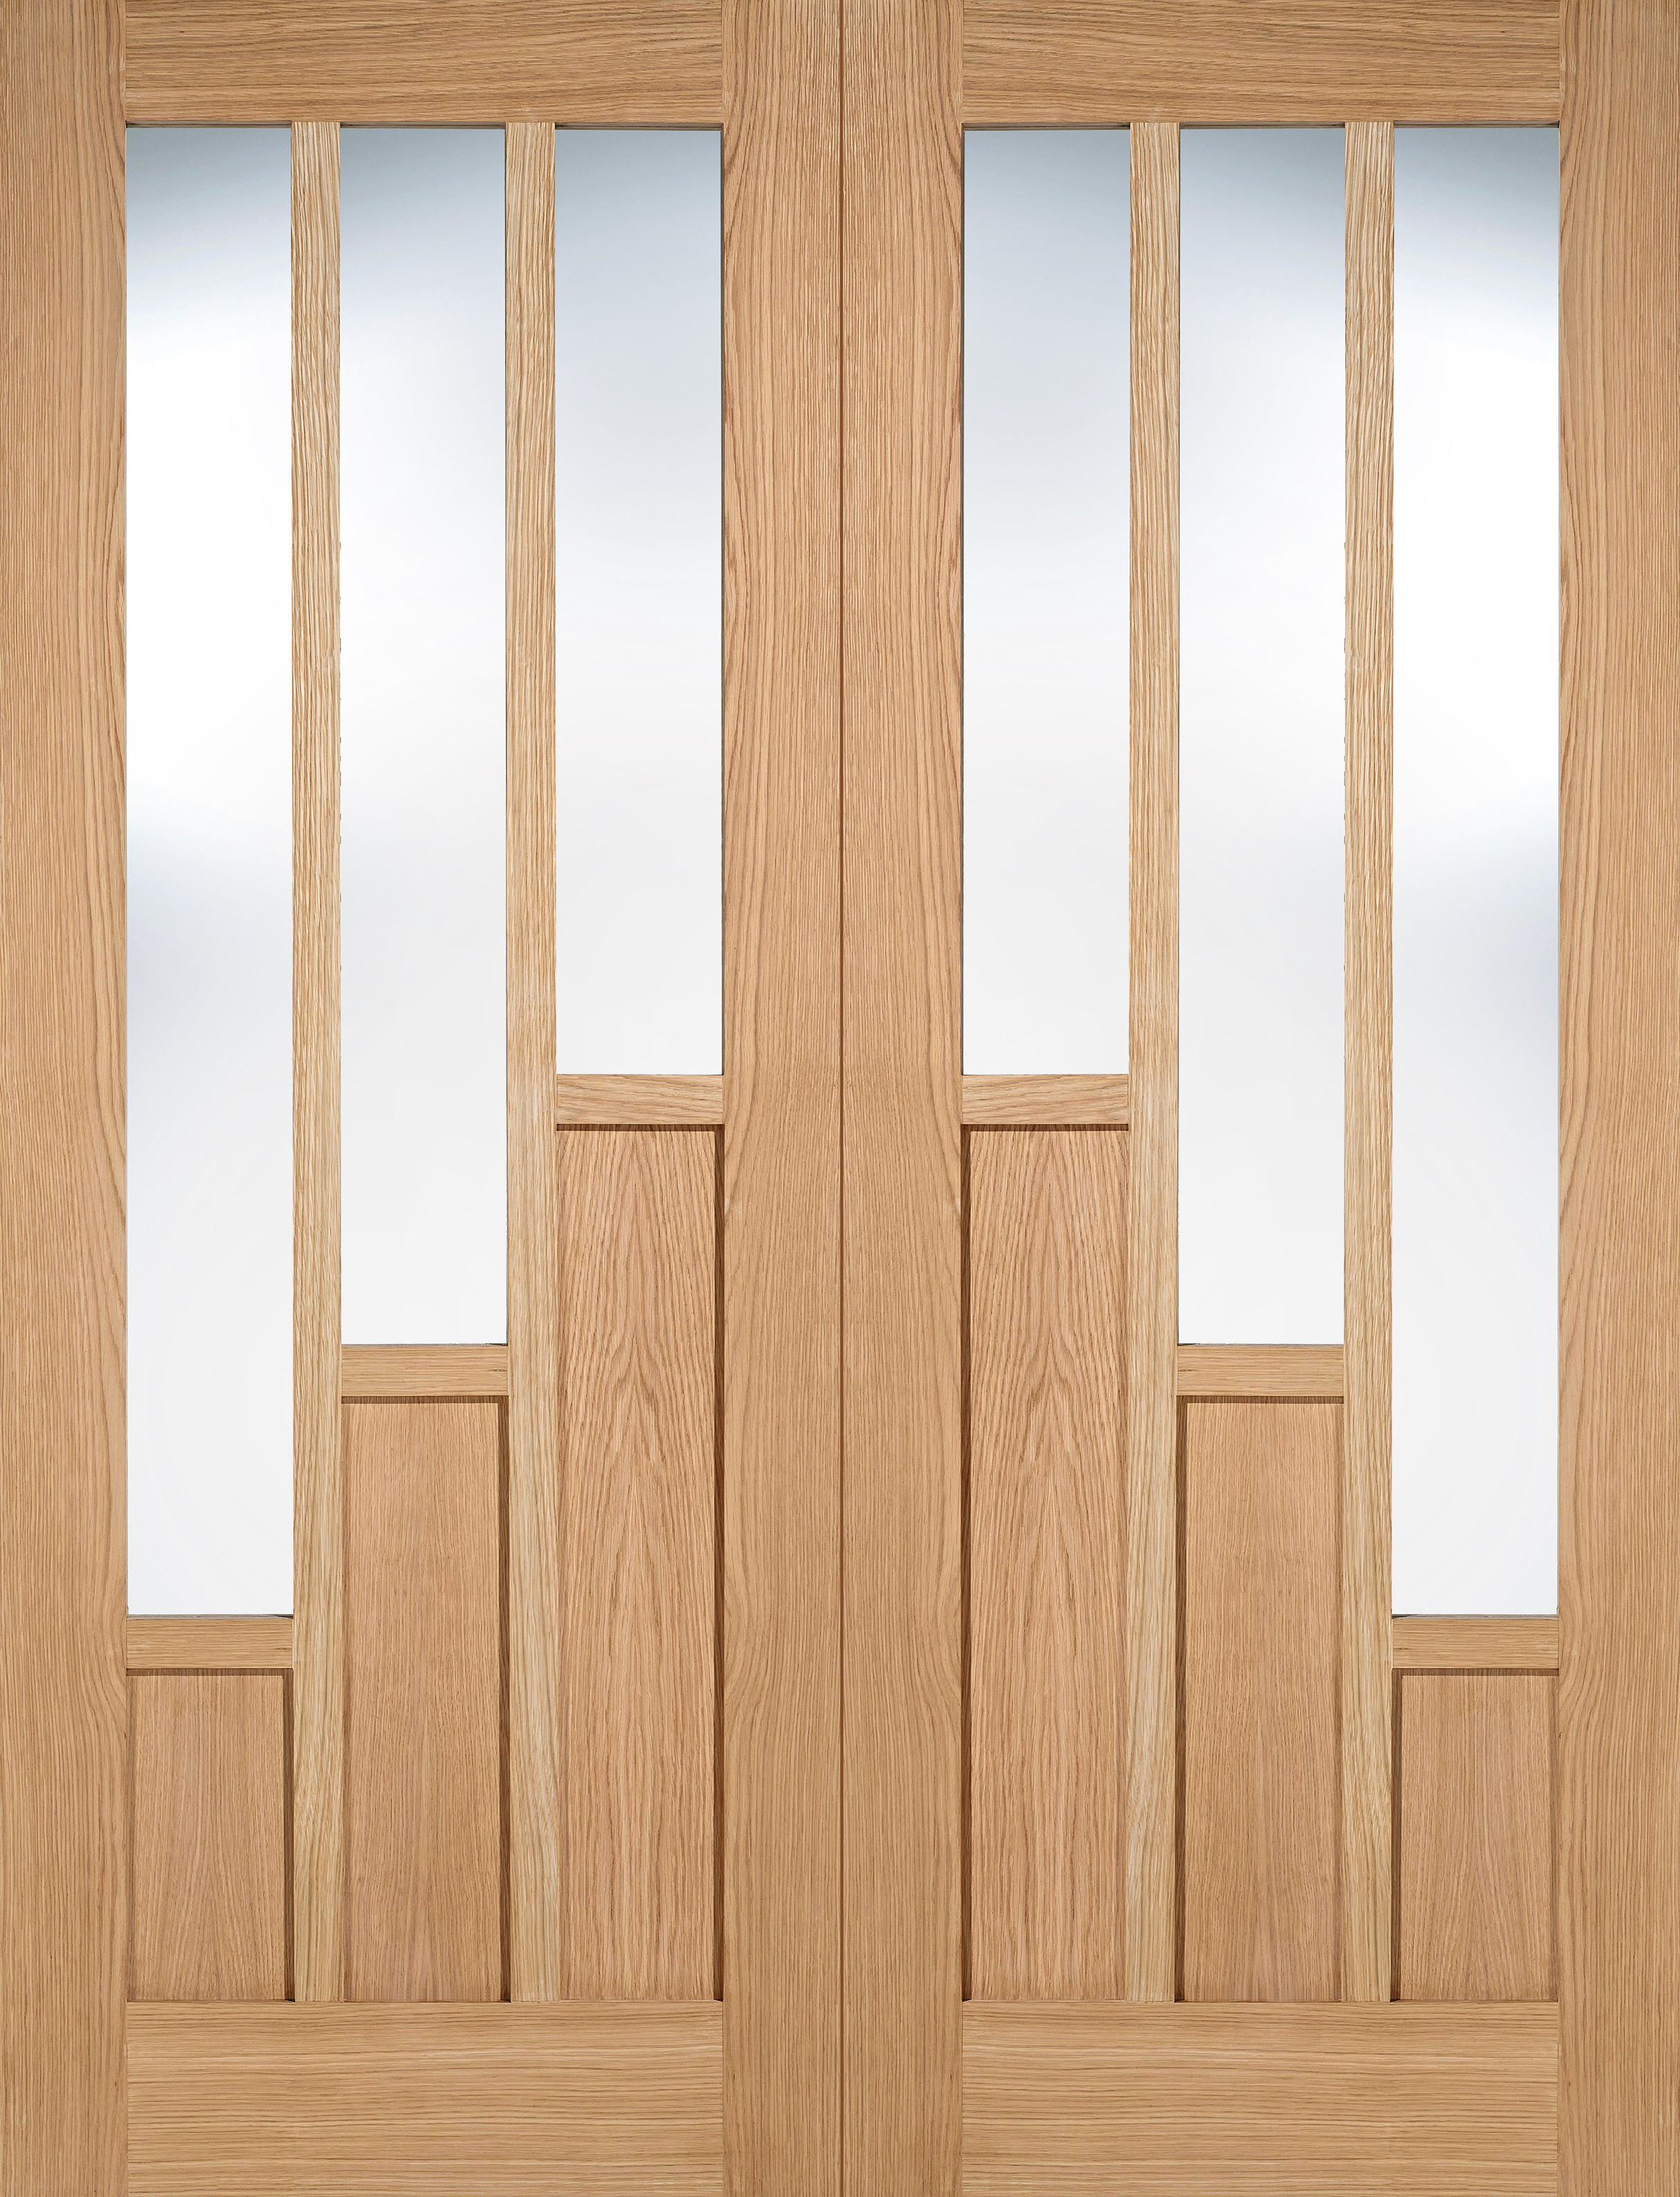 Oak Coventry Prefinished Glazed 3L Pairs LPD Doors